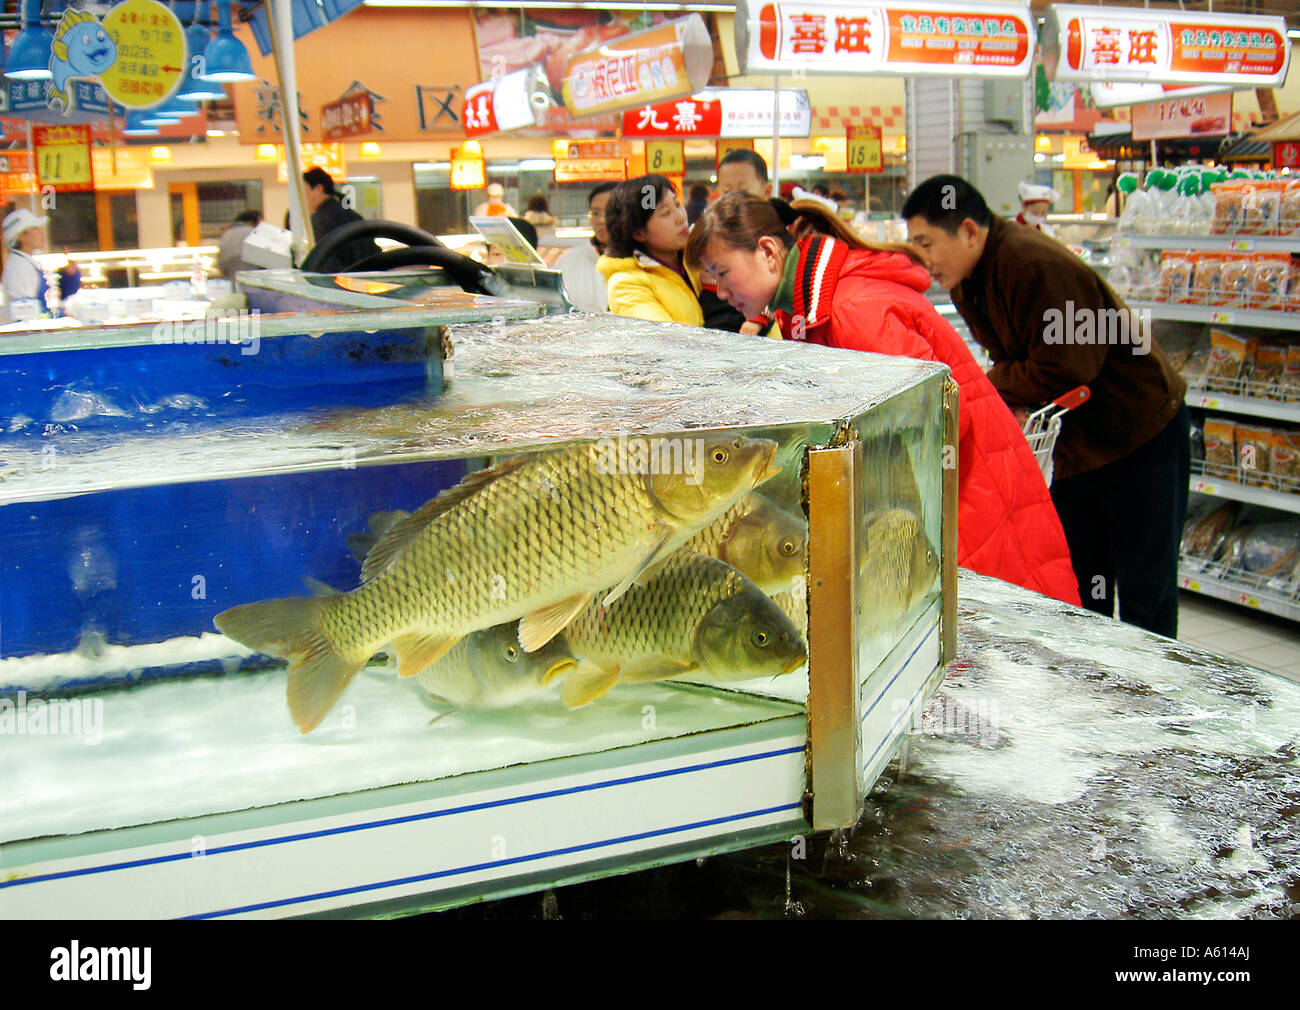 Taiwanese KT Mart store in city of Jinan, Shandong Province, China. Customers select fresh live fish from tanks Stock Photo